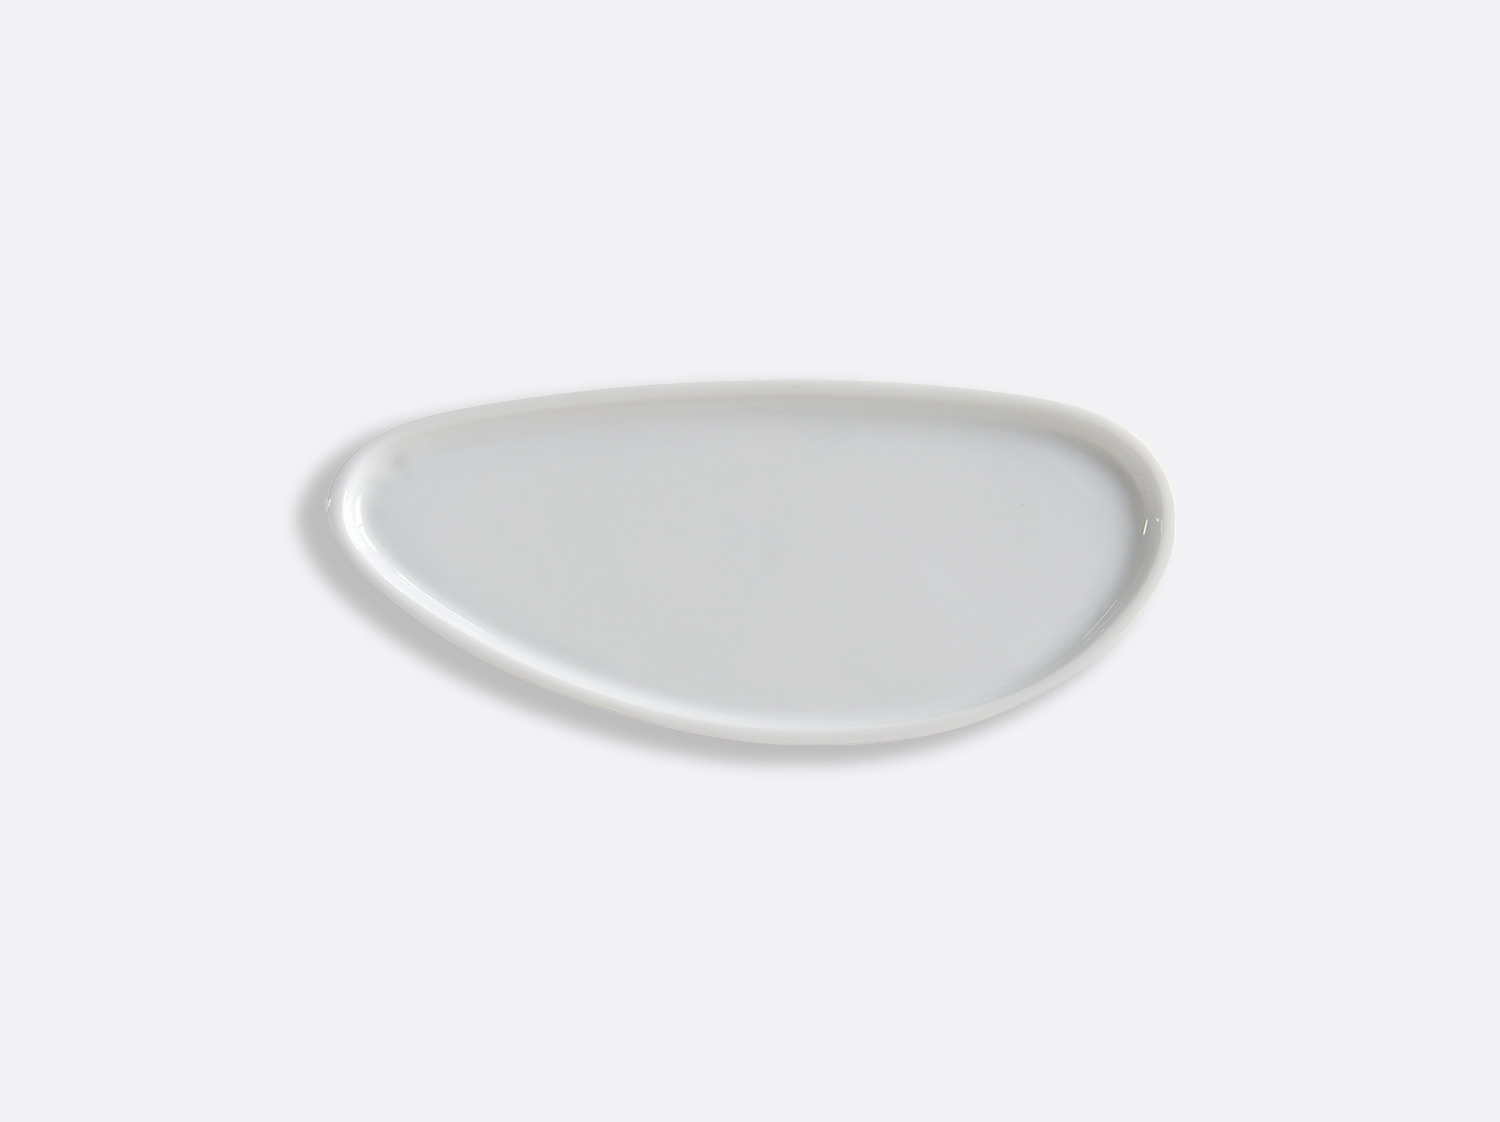 China Platter S4 white of the collection Ombres - Sarah-Linda Forrer | Bernardaud